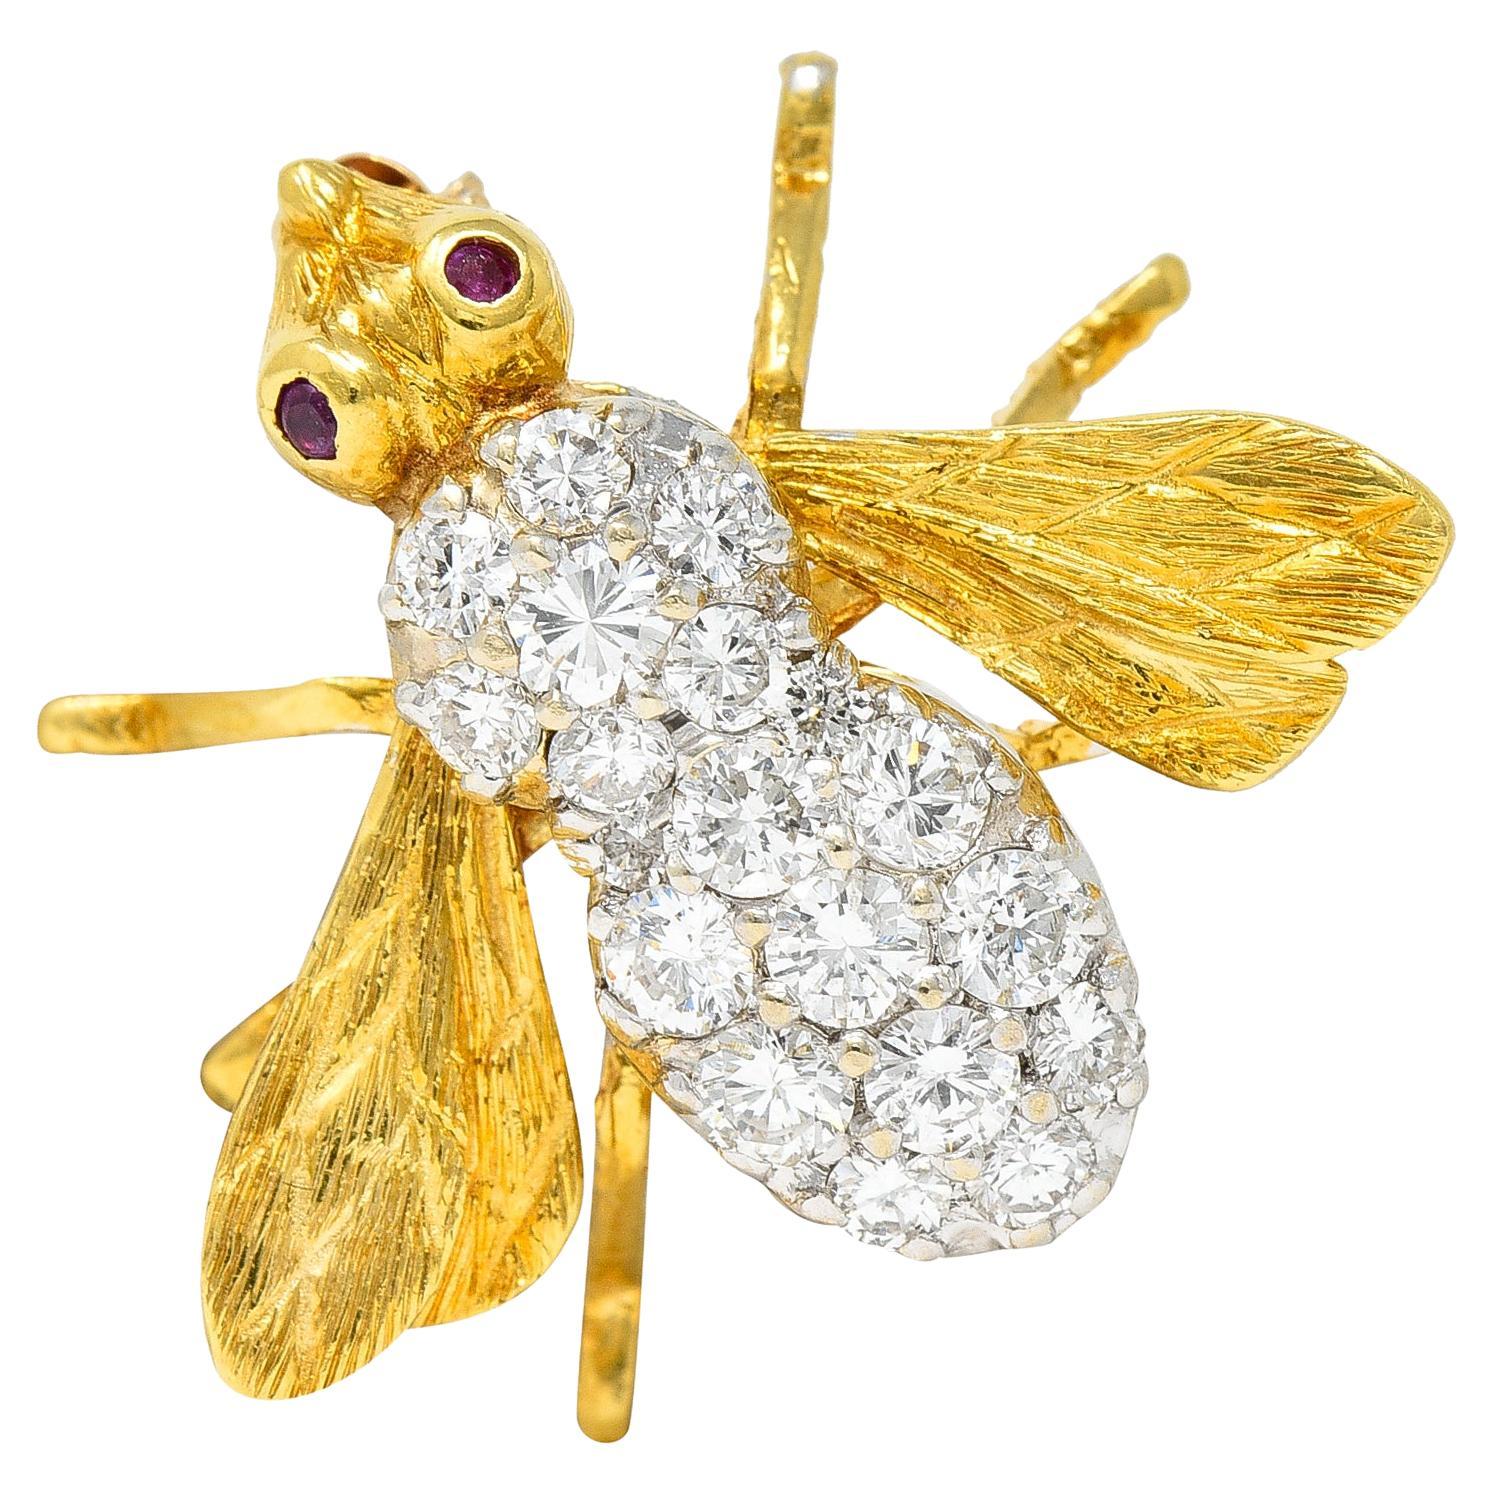 Brooch is designed as a stylized bee with spread and deeply engraved wings. With bezel set round cut rubies as eyes - purple red in color. Weighing in total approximately 0.03 carat. Body is set throughout by round brilliant cut diamonds. Weighing